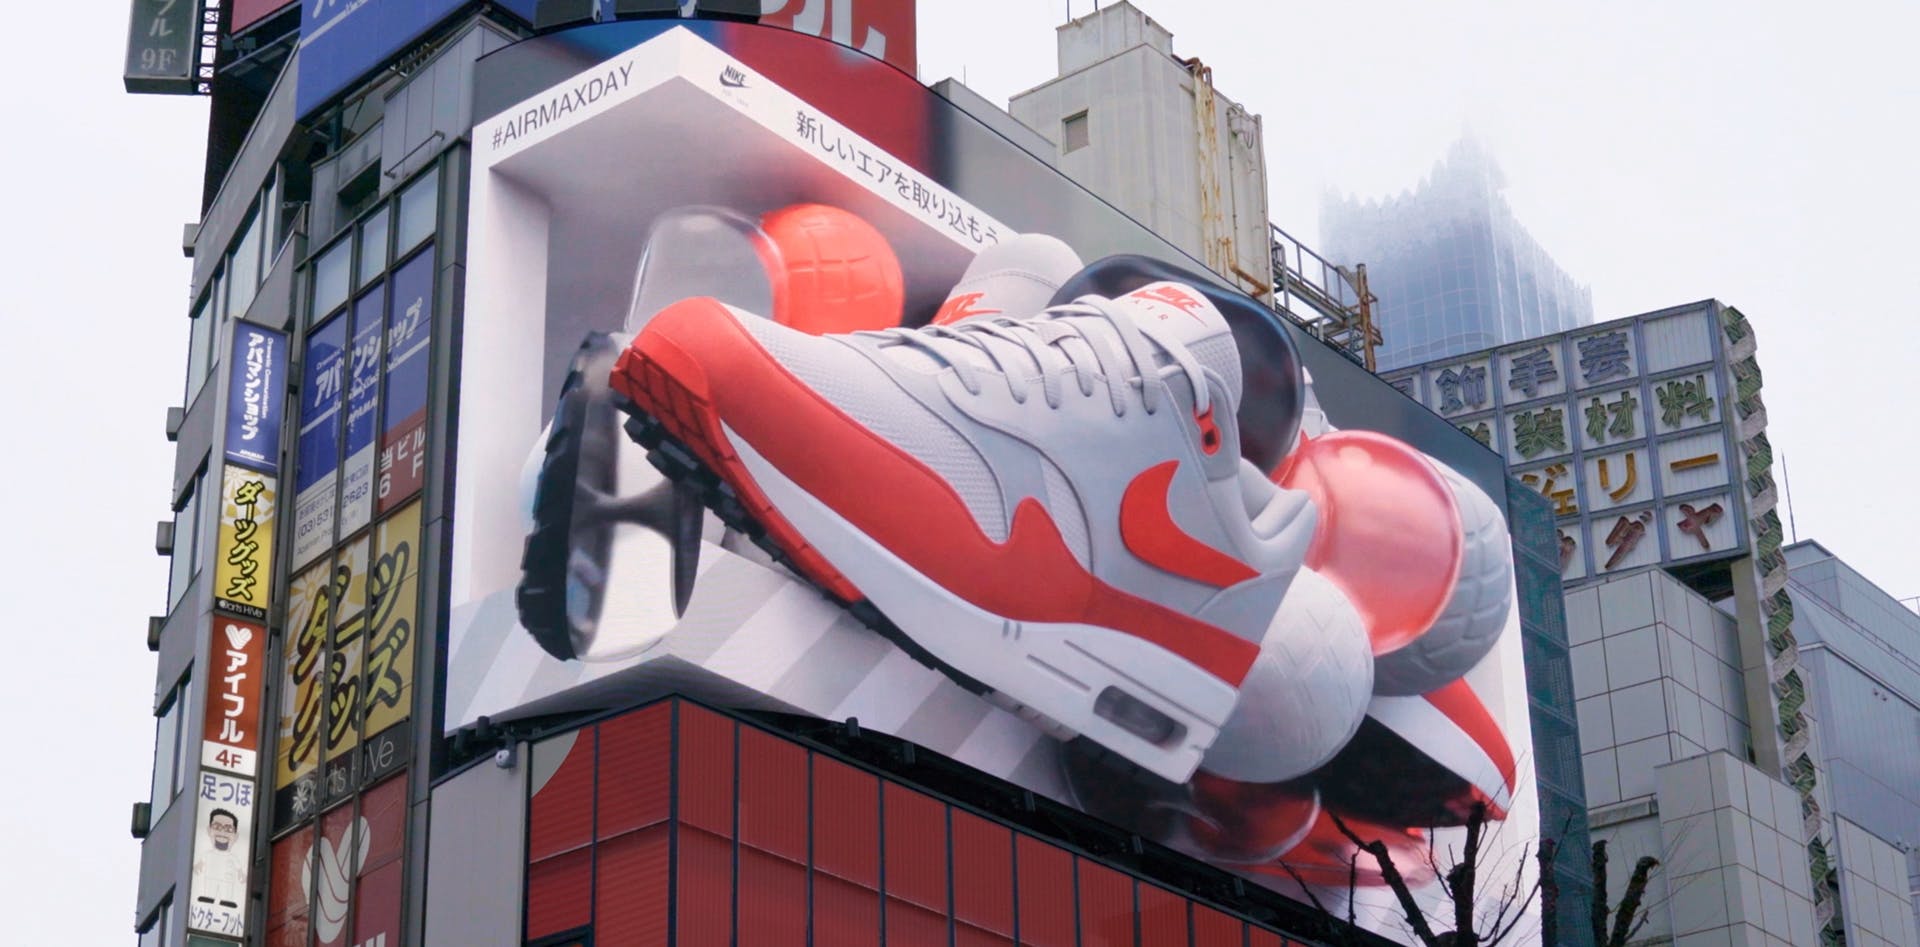 Nike celebrates Air Max Day with 3D billboard campaign الند